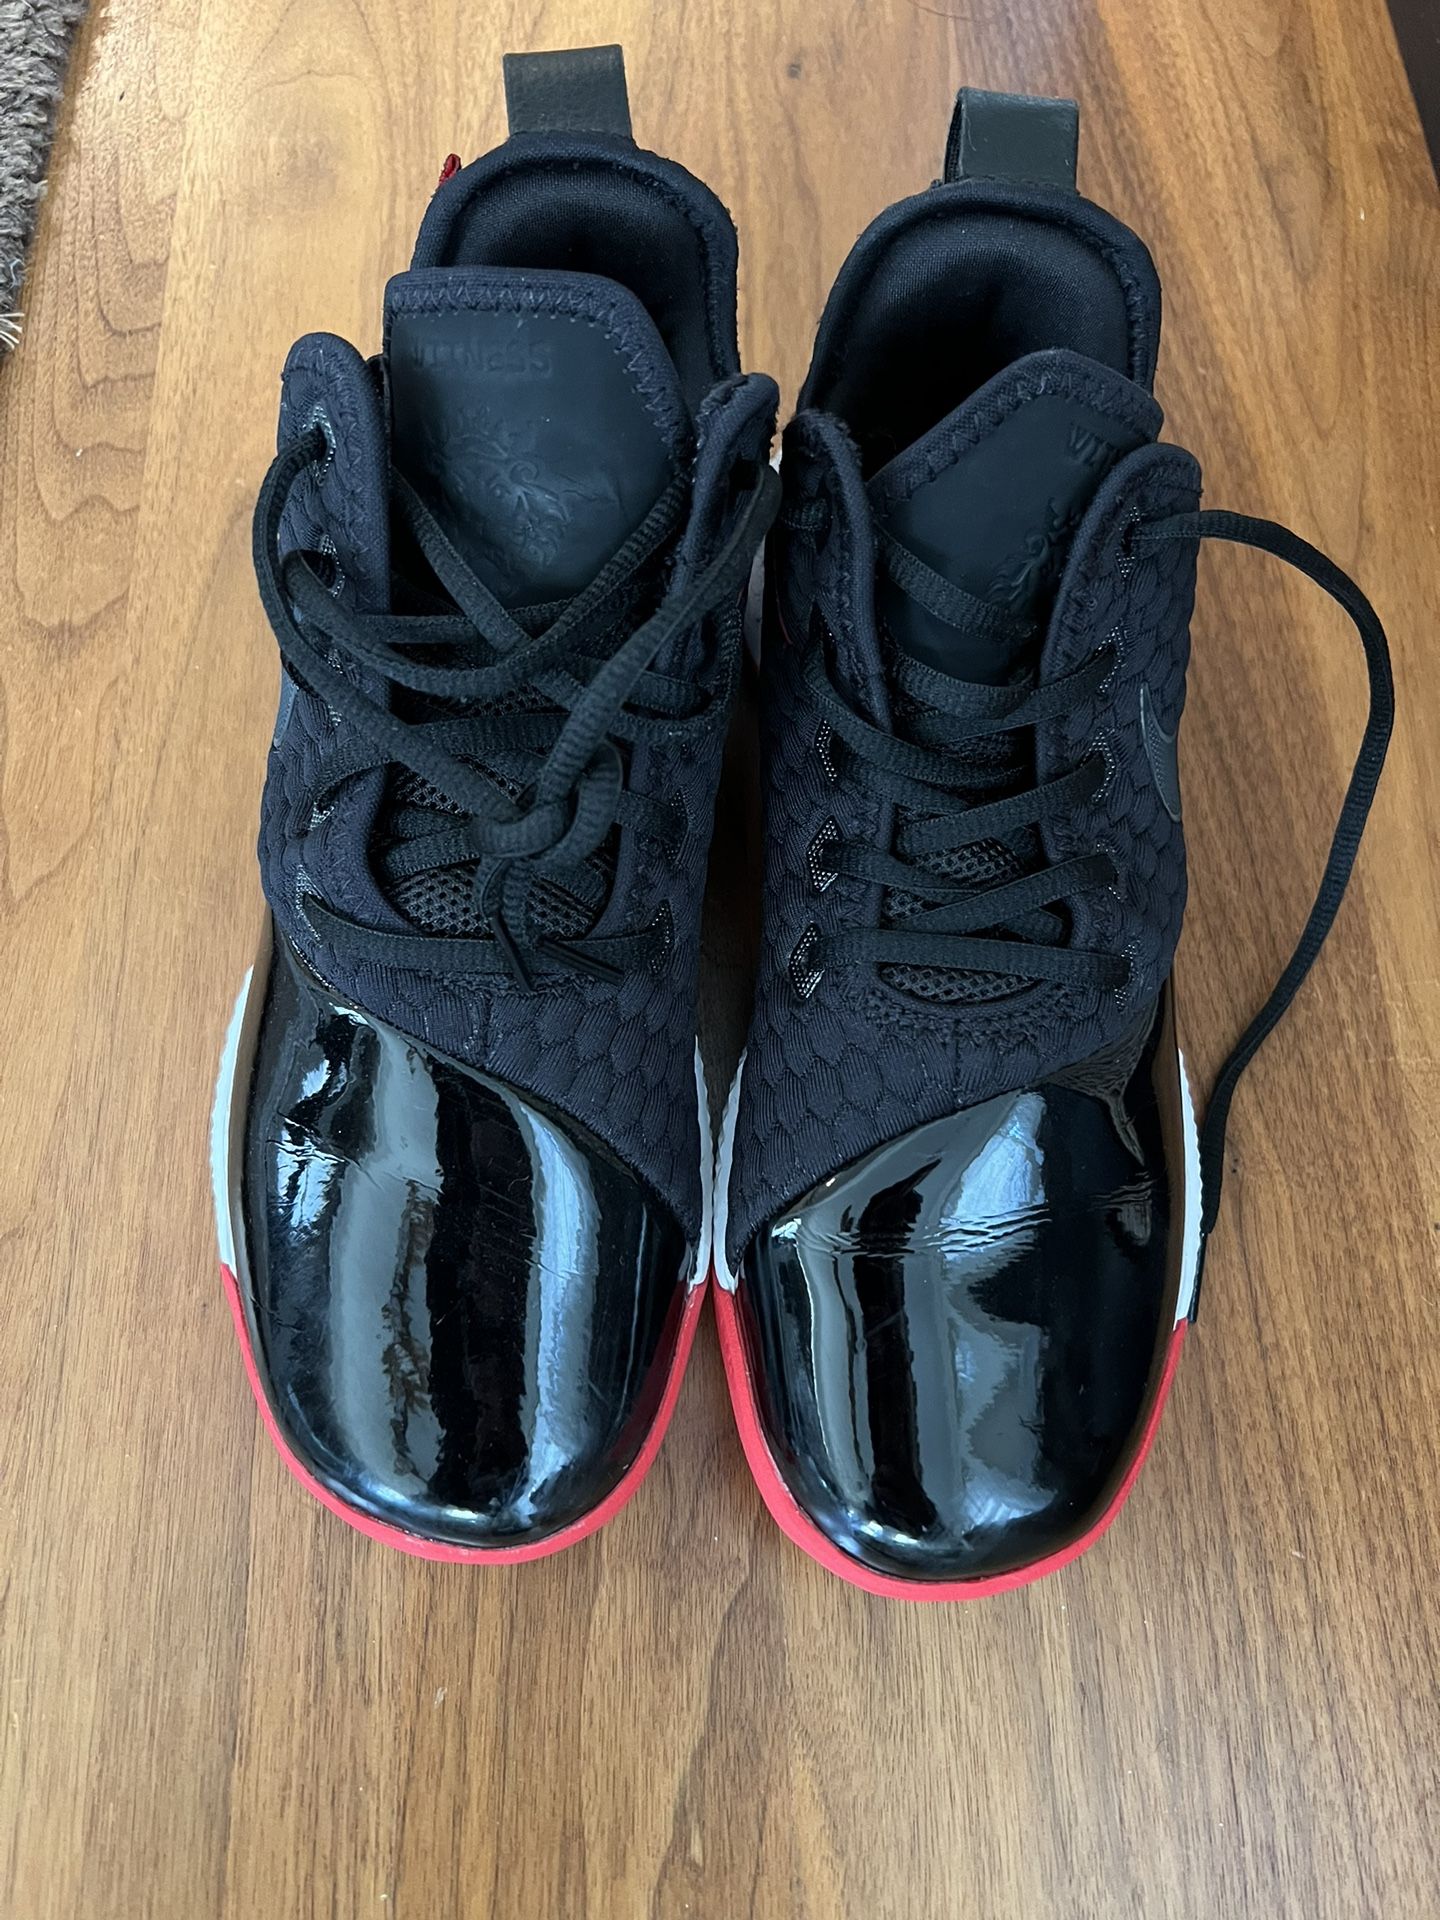 LeBron Witness 3 Premium 'Black Red' basketball shoes